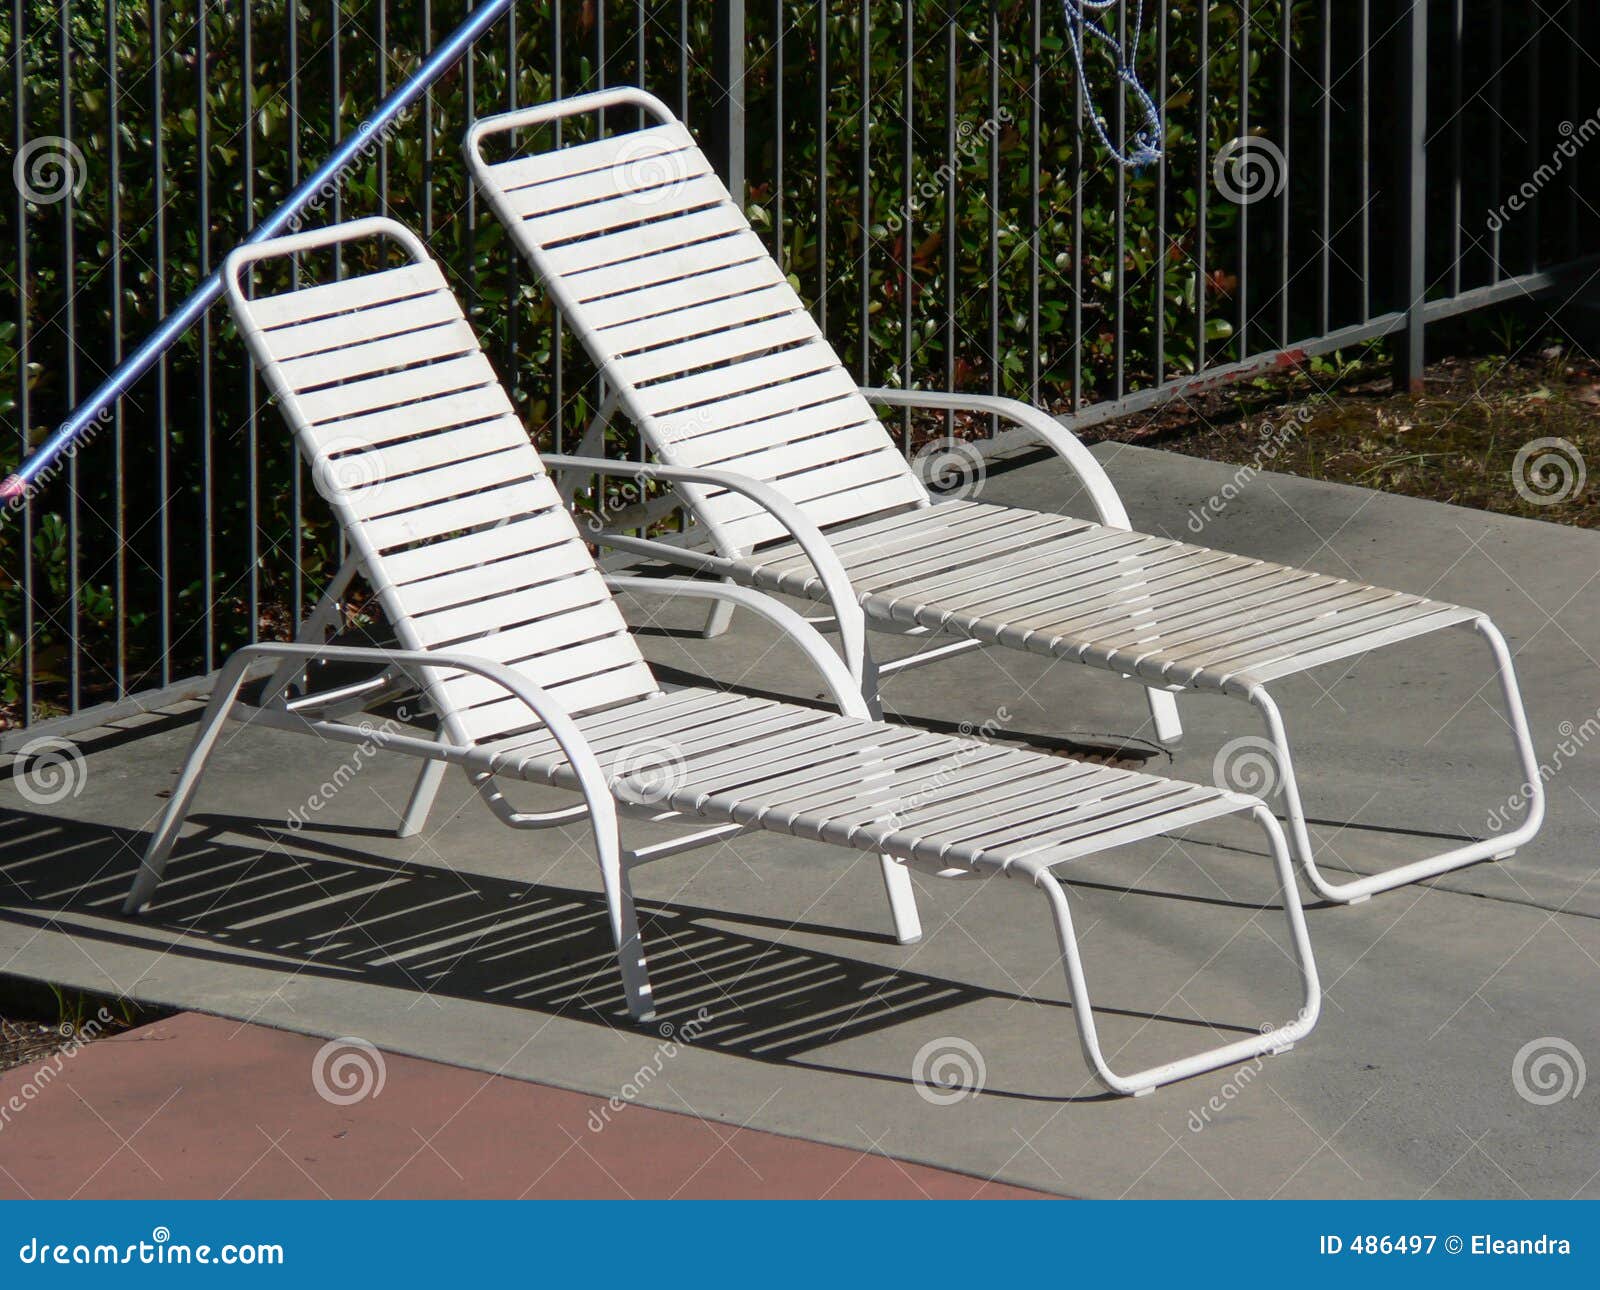 Pool Side Chairs Stock Image Image Of Resting Chair Furniture